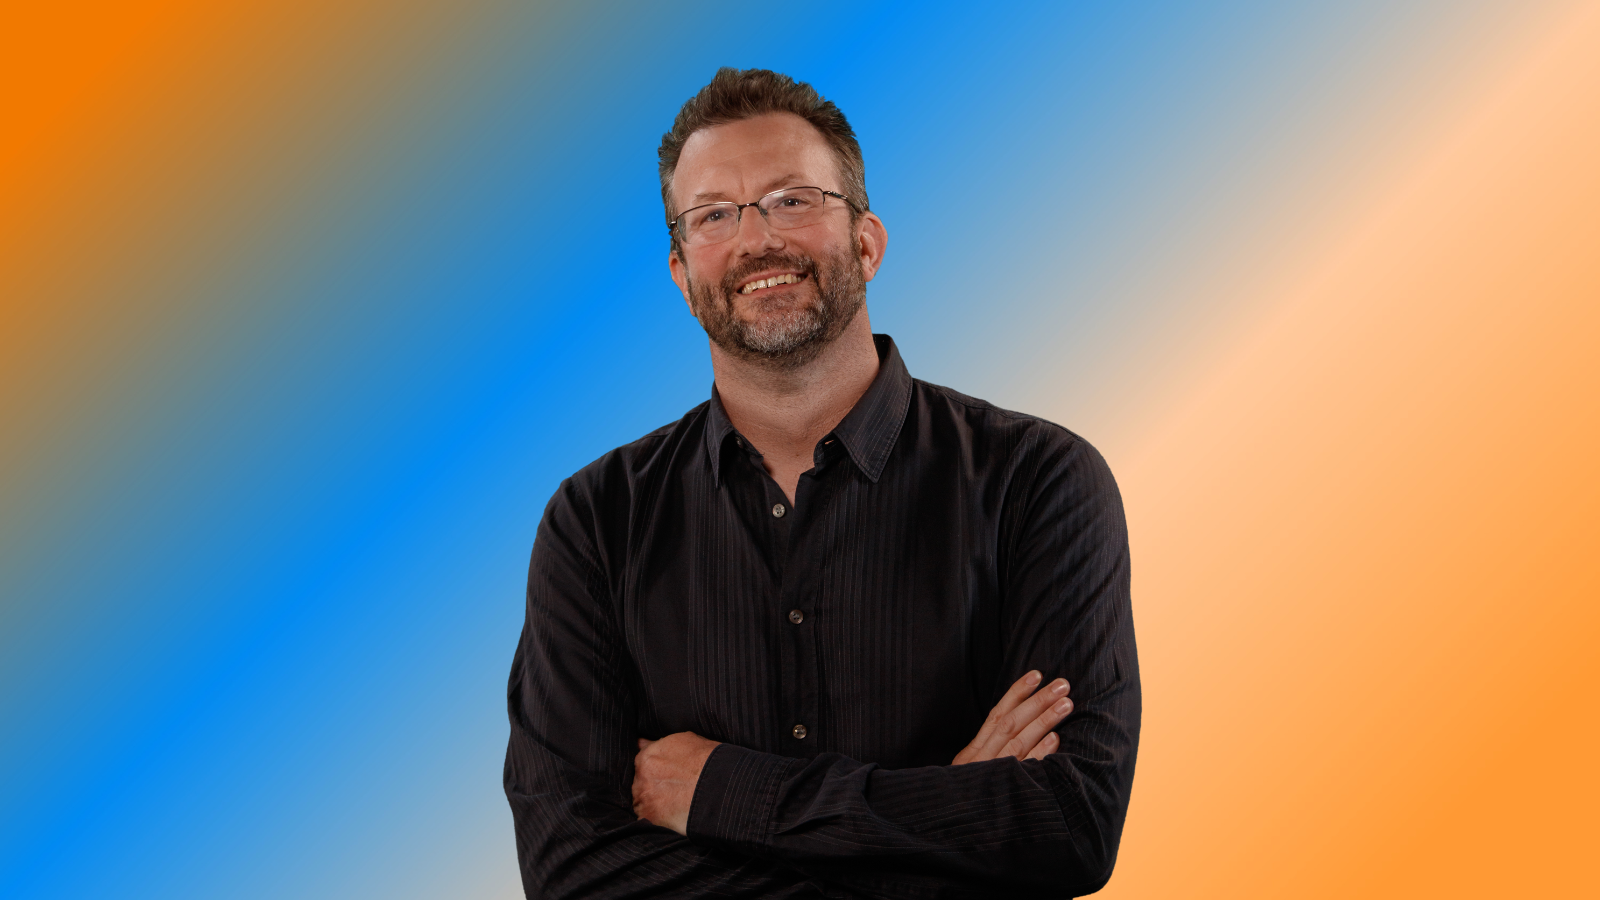 John Linden, co-founder and CEO of Mythical Games, poses for a photo in front of an orange and blue background